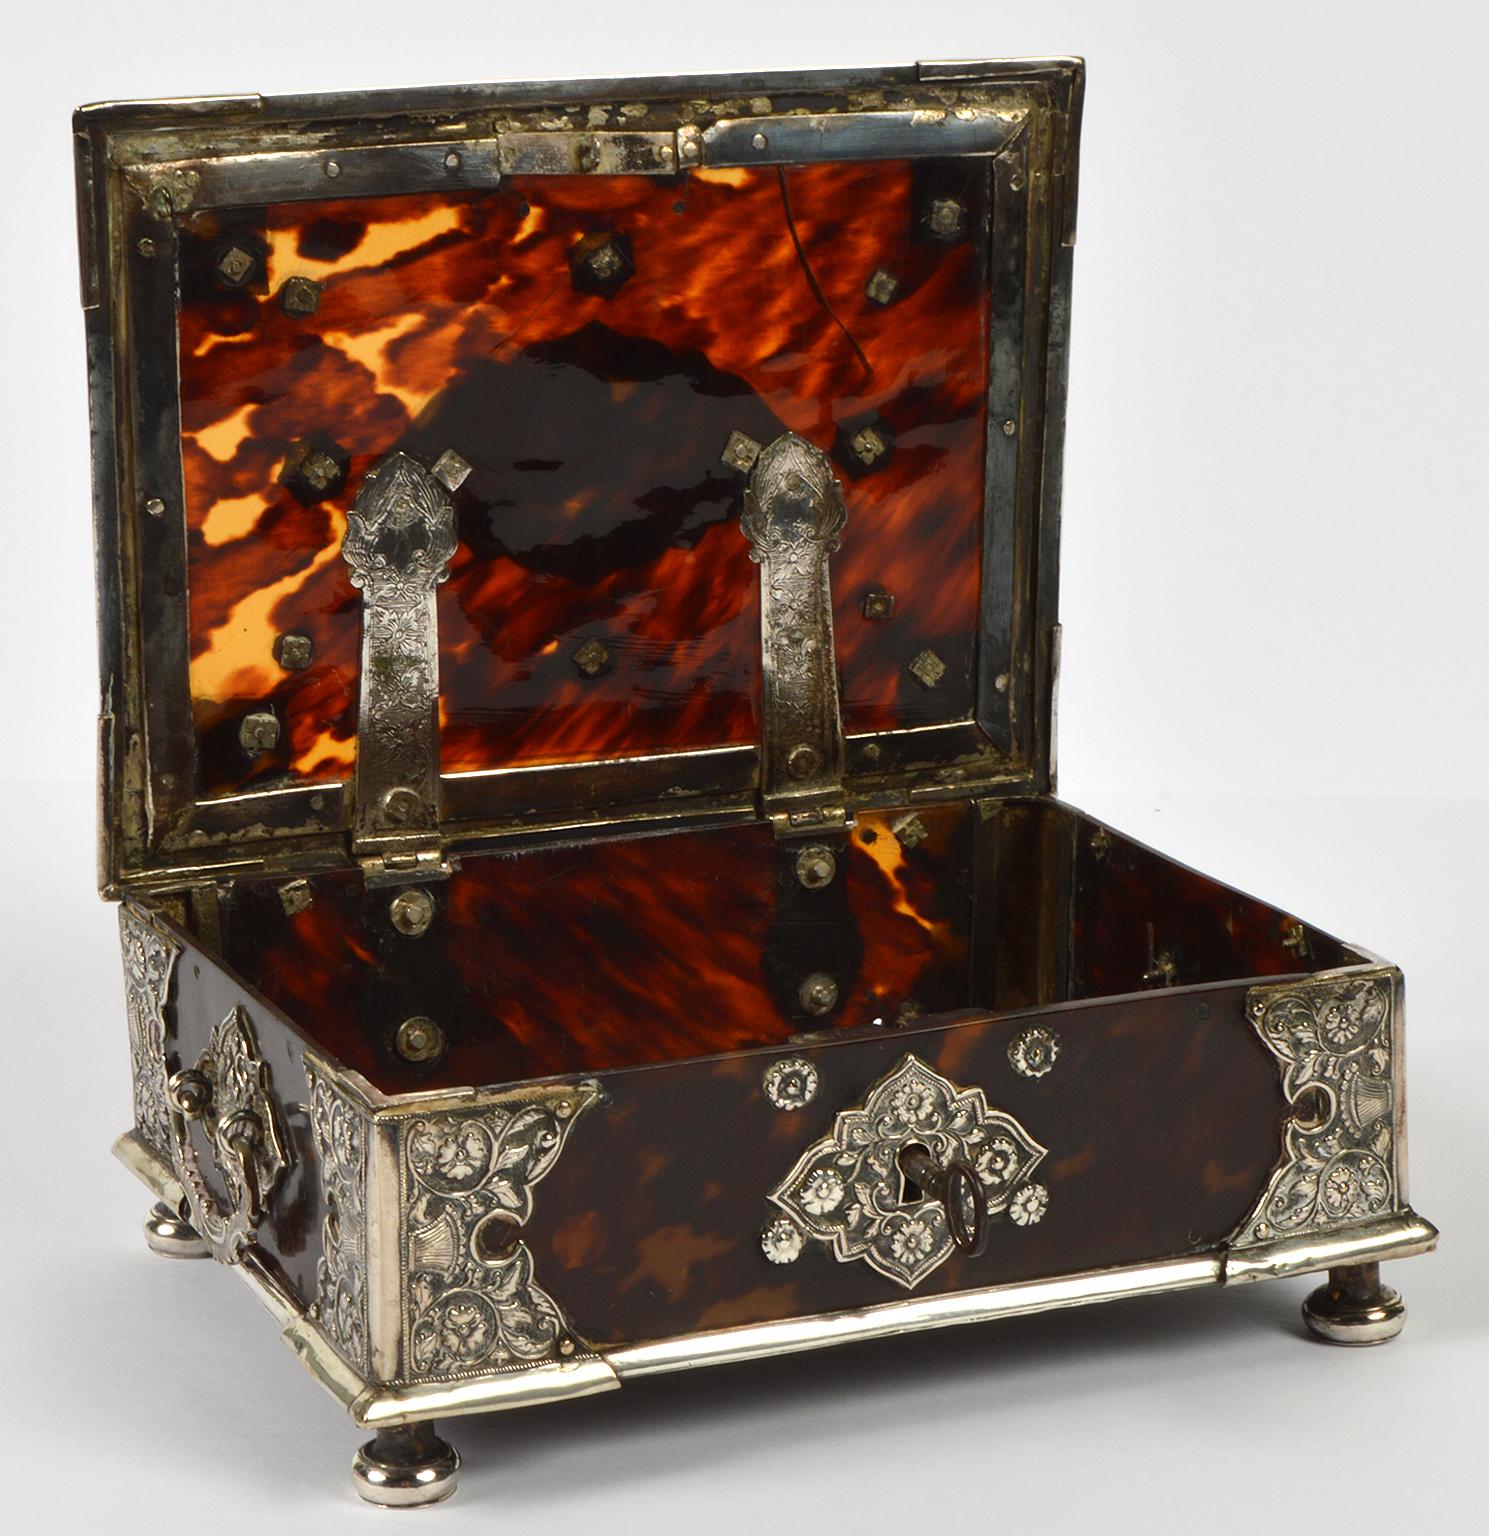 Standing on prolonged silver bun feet this magnificent box features a body of tortoiseshell, engraved hinges, handles and repousse silver mounts and plaques combined with straight silver bands. The decorative patterns depict flowers, leafwork and